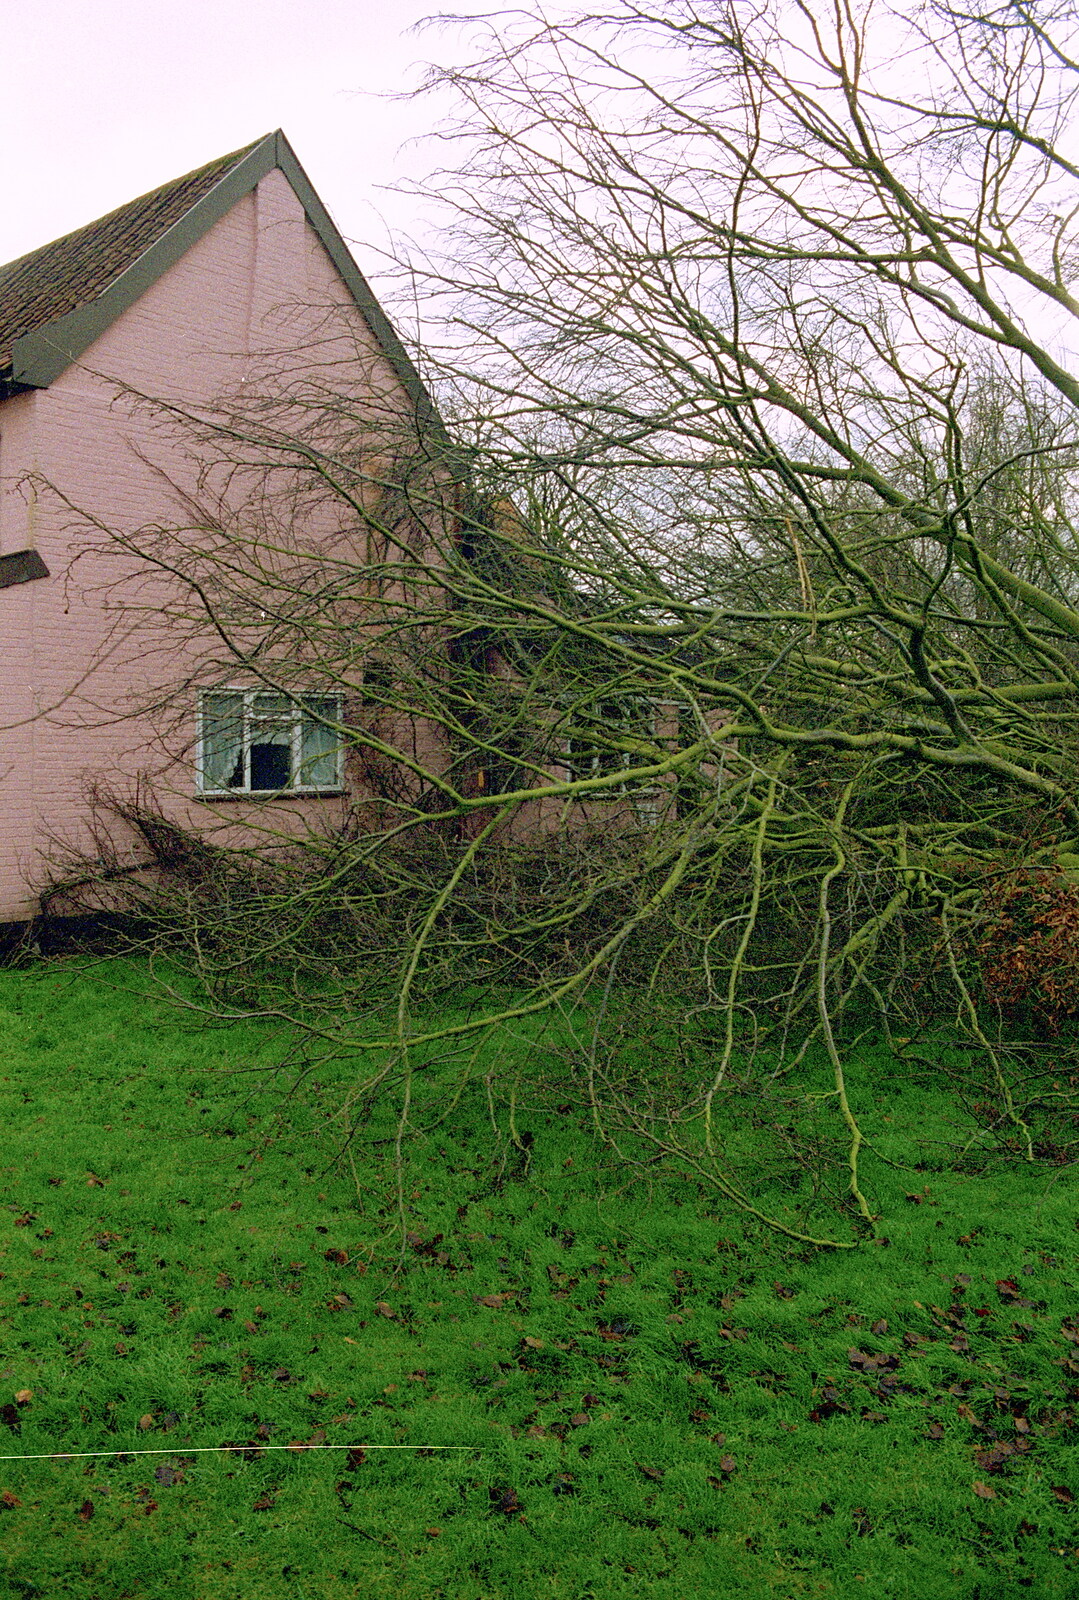 A Fallen Tree at The Swan, Brome, Suffolk - January 21st 2001: Another view of the tree